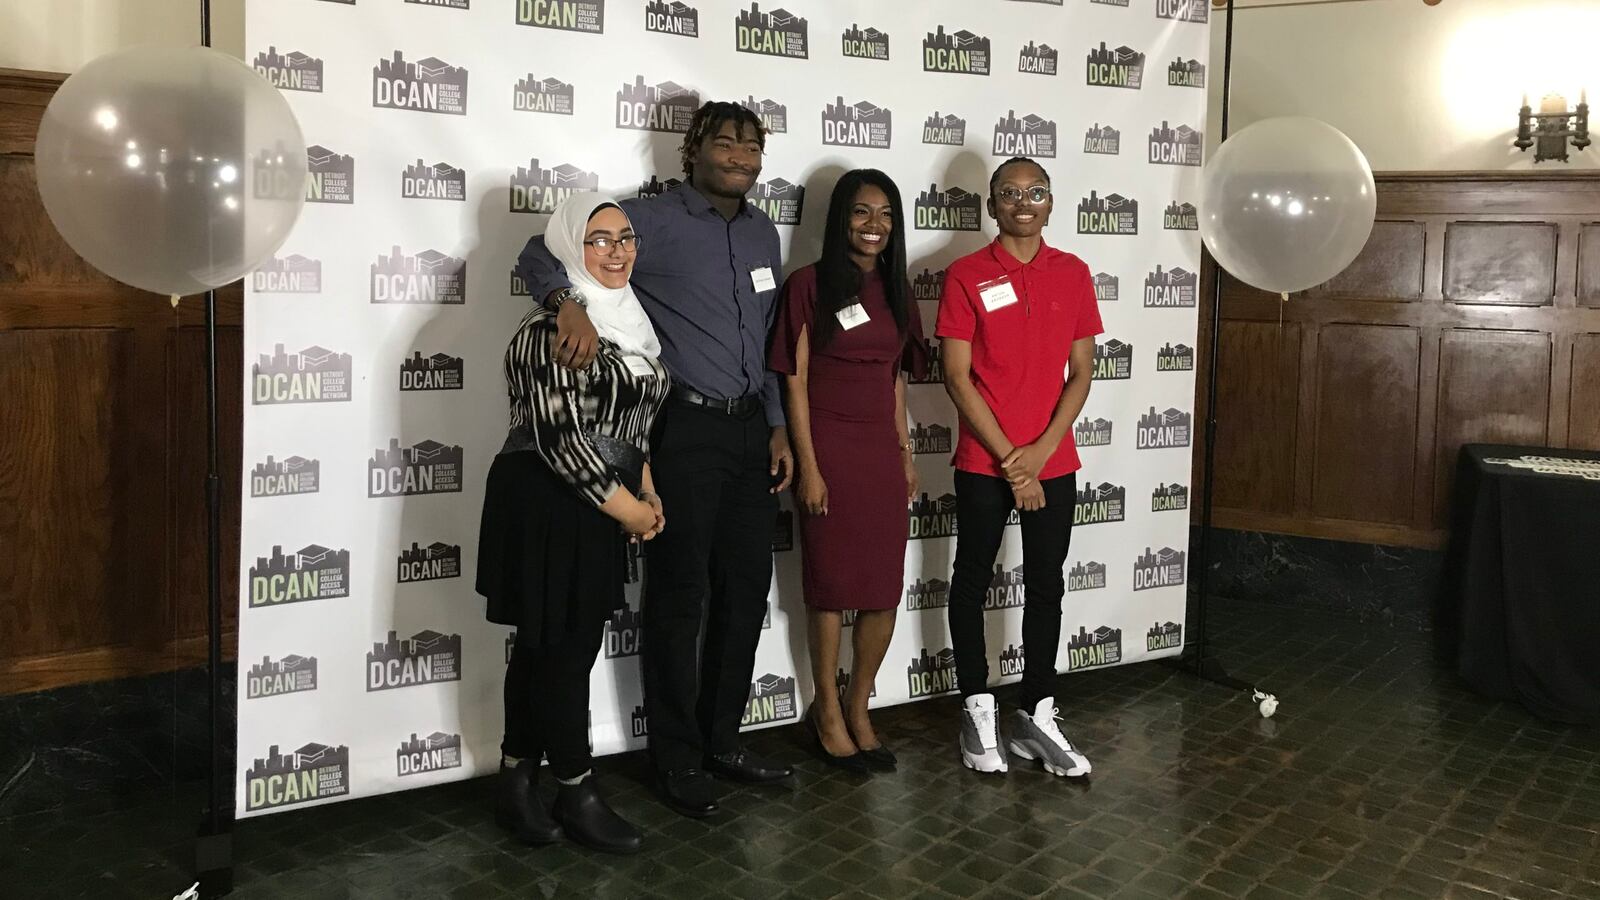 From left, America Yahya, De'Ernst Johnson, Myla Smith, and Anton Bronson pose for a photo after participating in a panel discussion about college success.